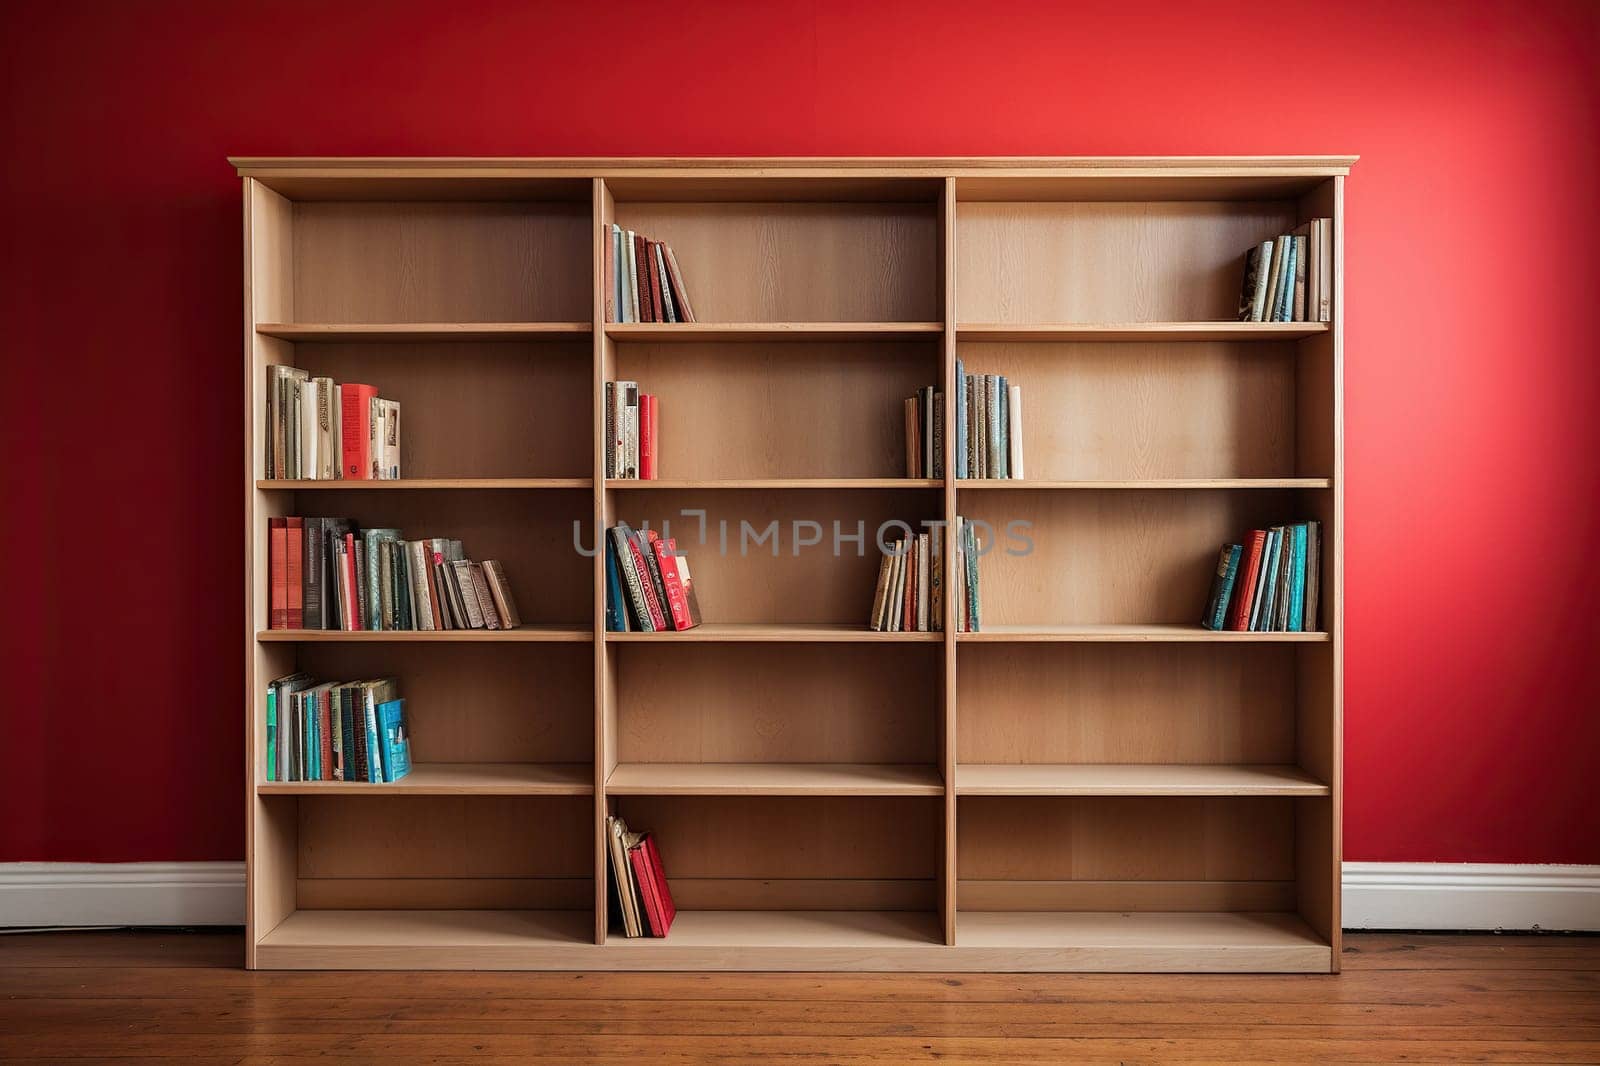 Wooden bookcase with books on shelves near a red wall on a wooden floor. Generated by artificial intelligence by Vovmar